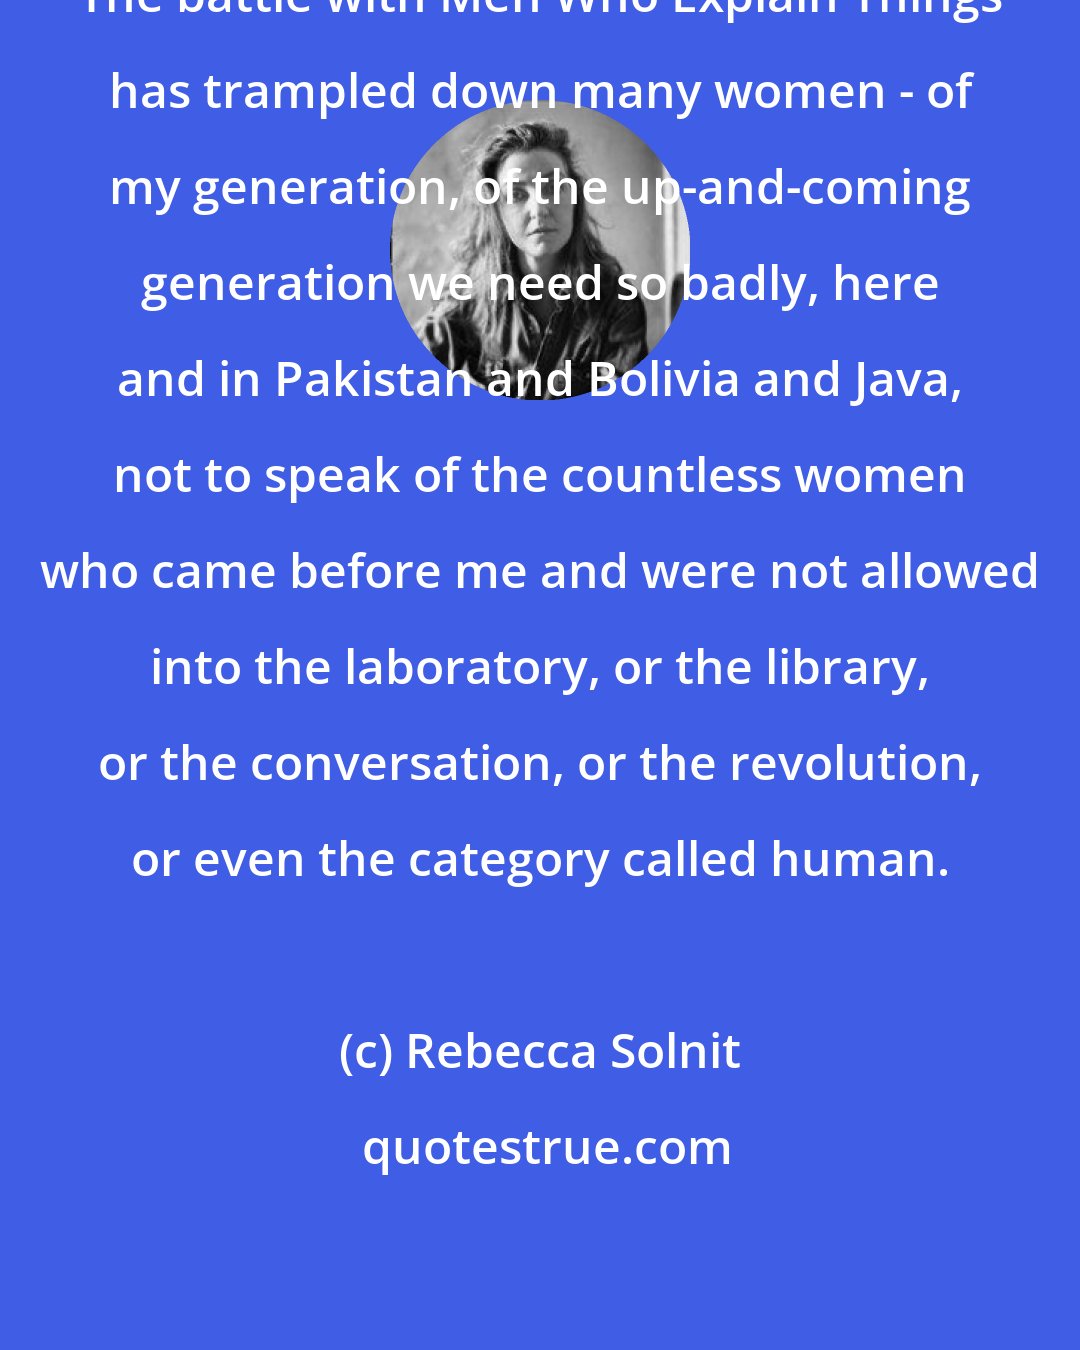 Rebecca Solnit: The battle with Men Who Explain Things has trampled down many women - of my generation, of the up-and-coming generation we need so badly, here and in Pakistan and Bolivia and Java, not to speak of the countless women who came before me and were not allowed into the laboratory, or the library, or the conversation, or the revolution, or even the category called human.